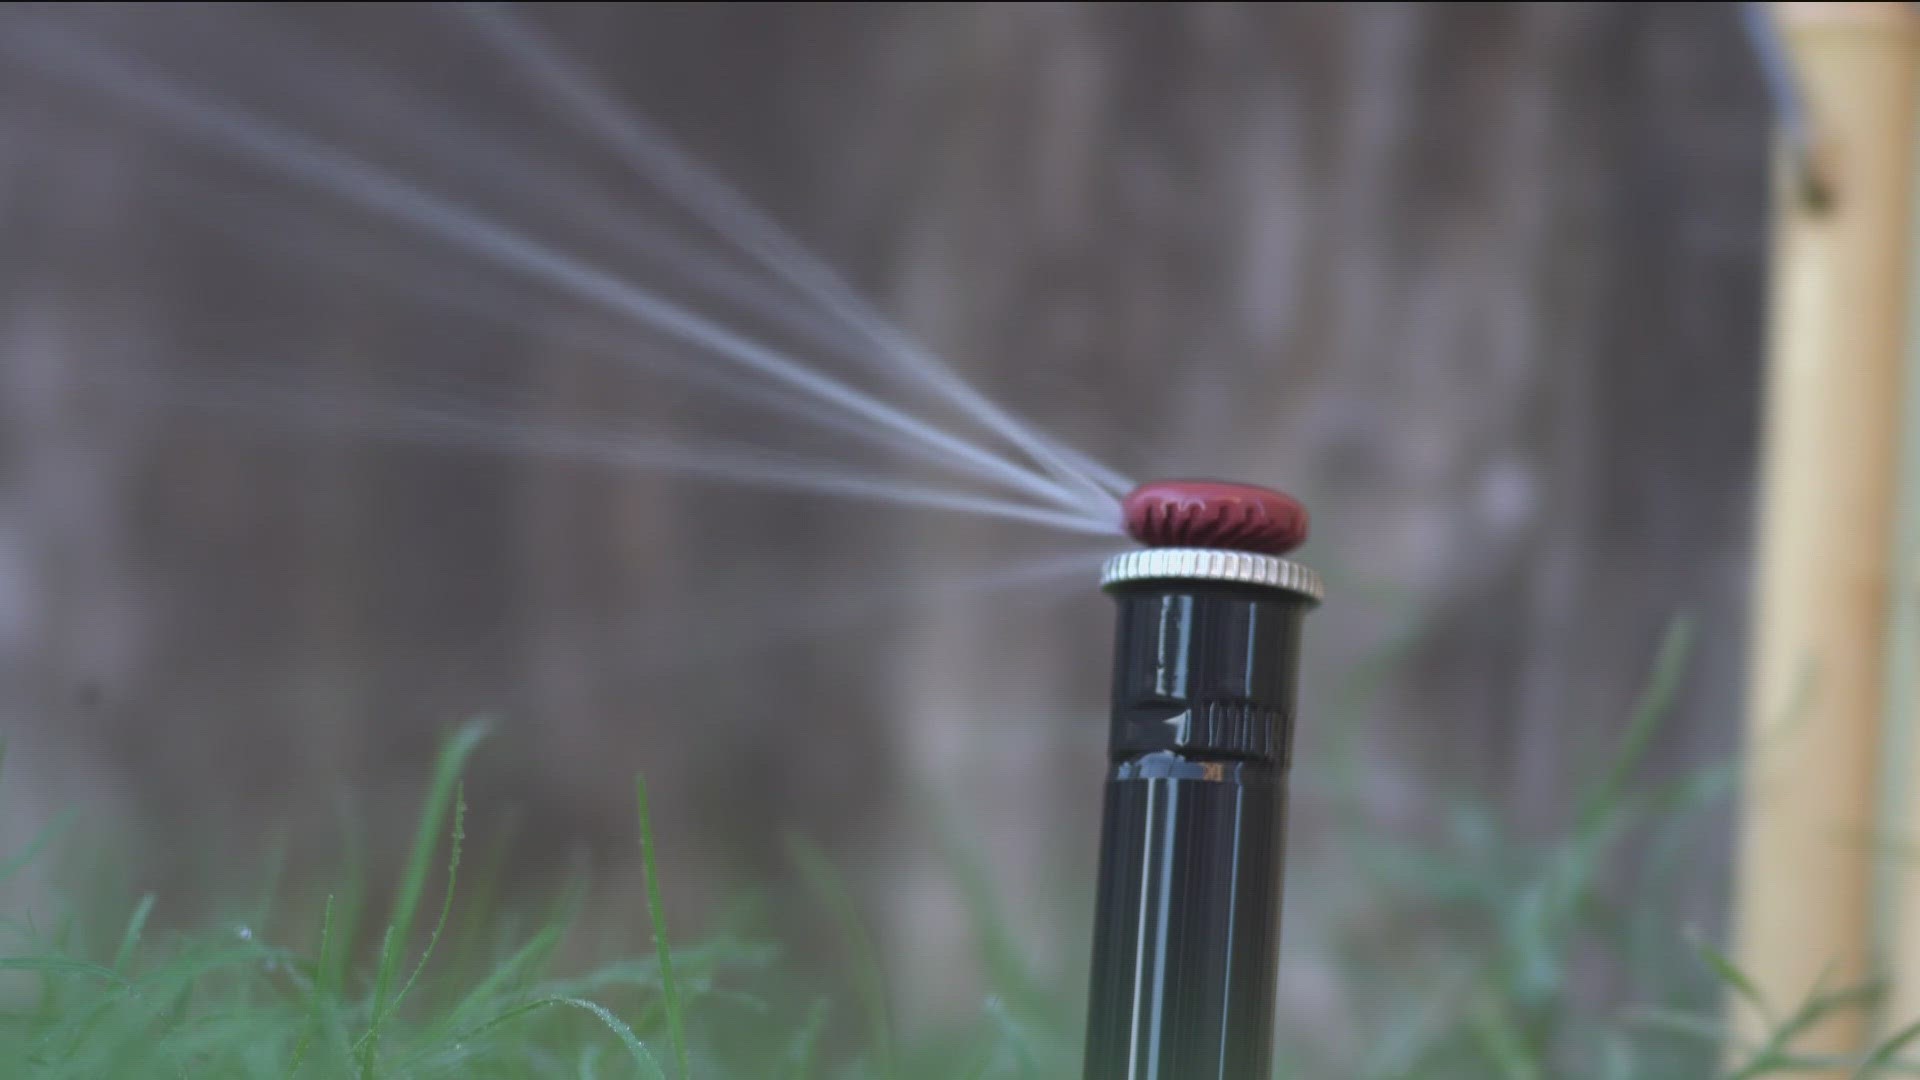 The KVUE Defenders have been looking into how communities are addressing water scarcity. More cities are turning to reclaimed water to prepare for the future.